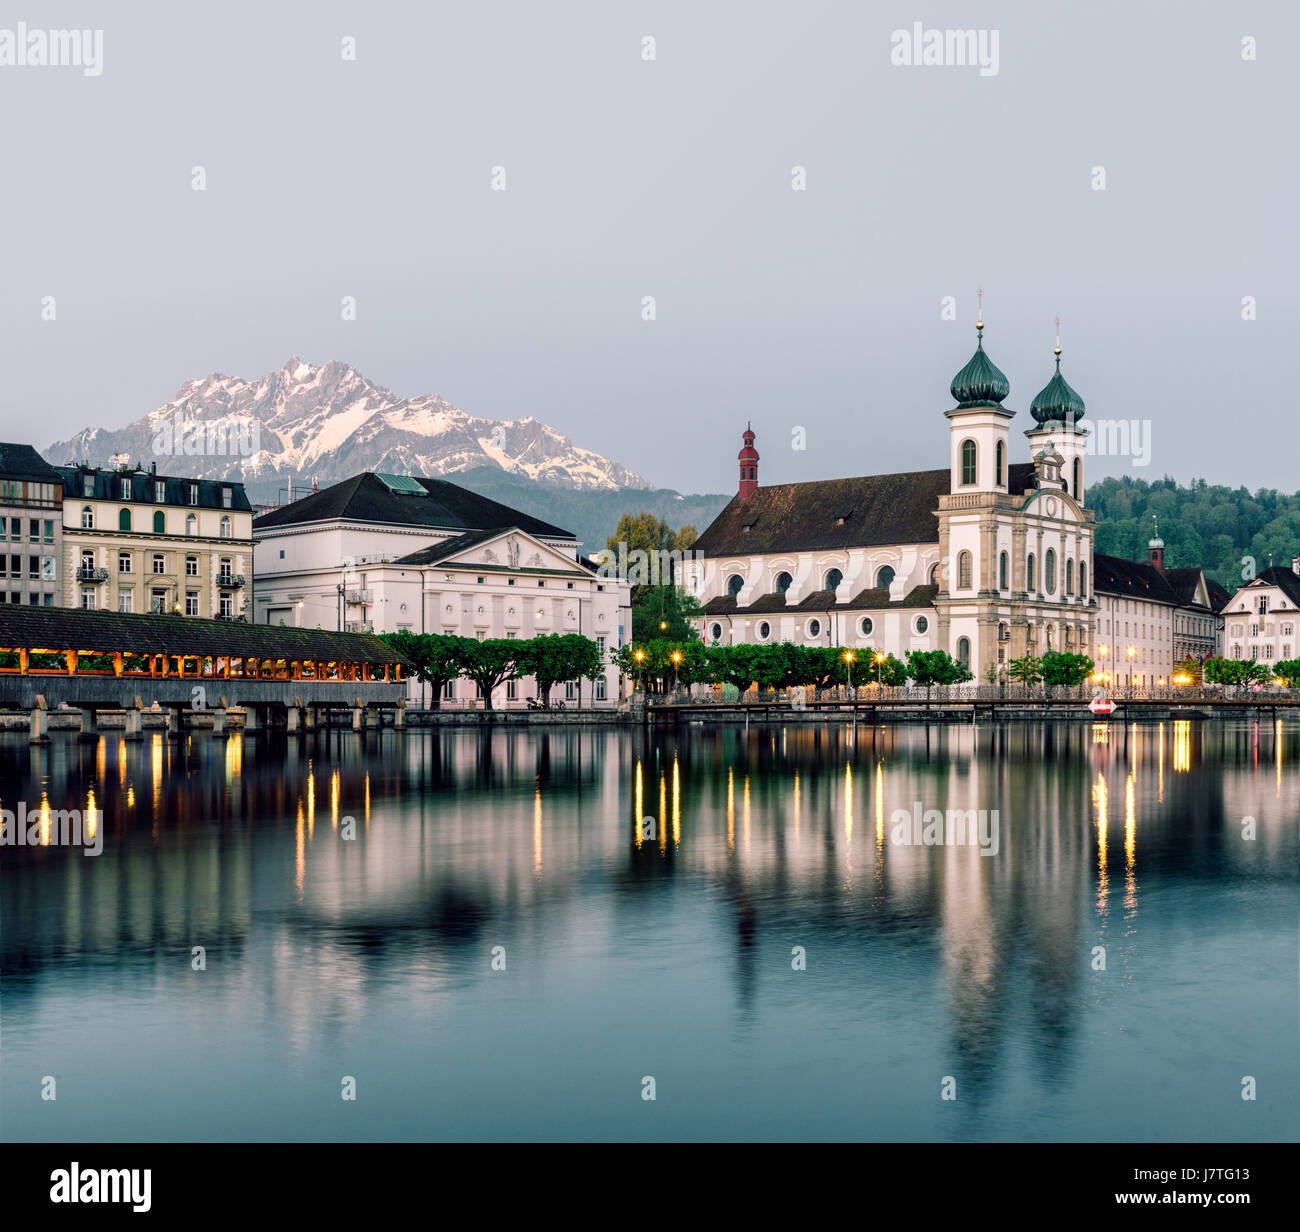 Blue hour in Lucerne, Switzerland with a view of the Swiss Alps and Stock Photo